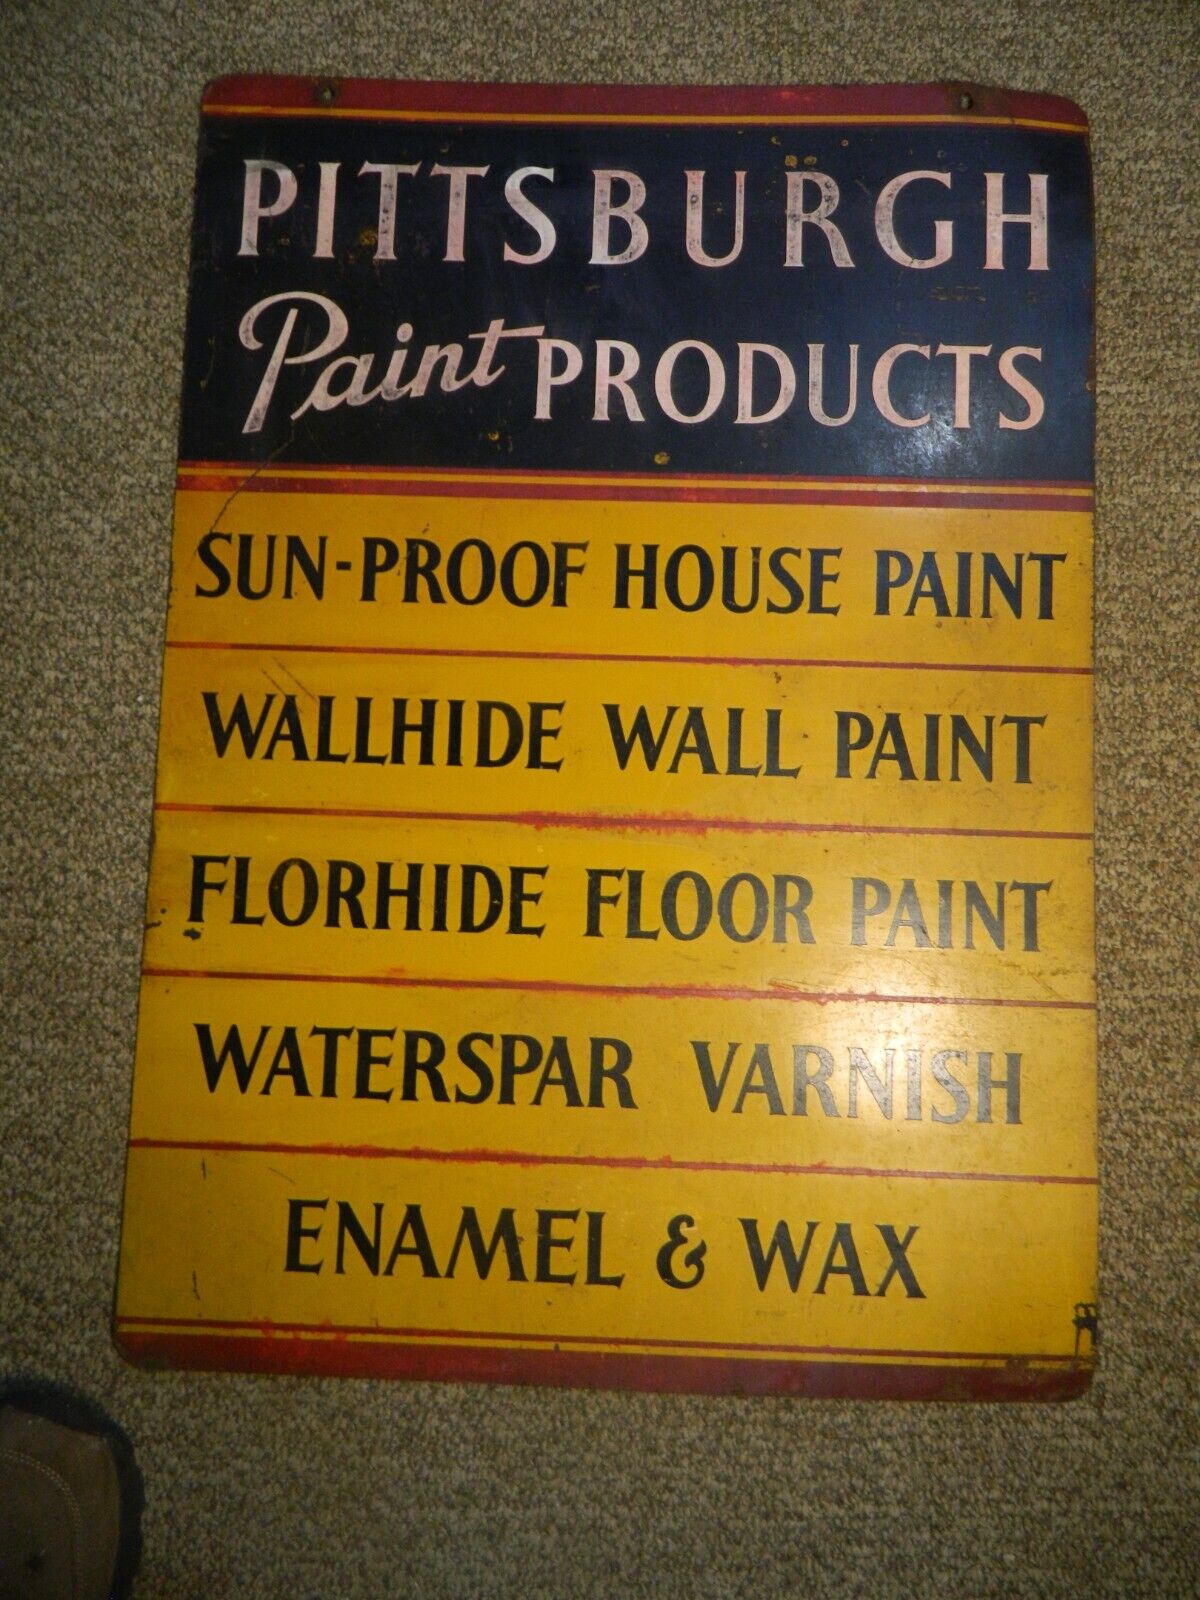 VINTAGE PITTSBURGH PAINT PRODUCTS METAL SIGN 27 1/2 x 19 1/2 TWO SIDED